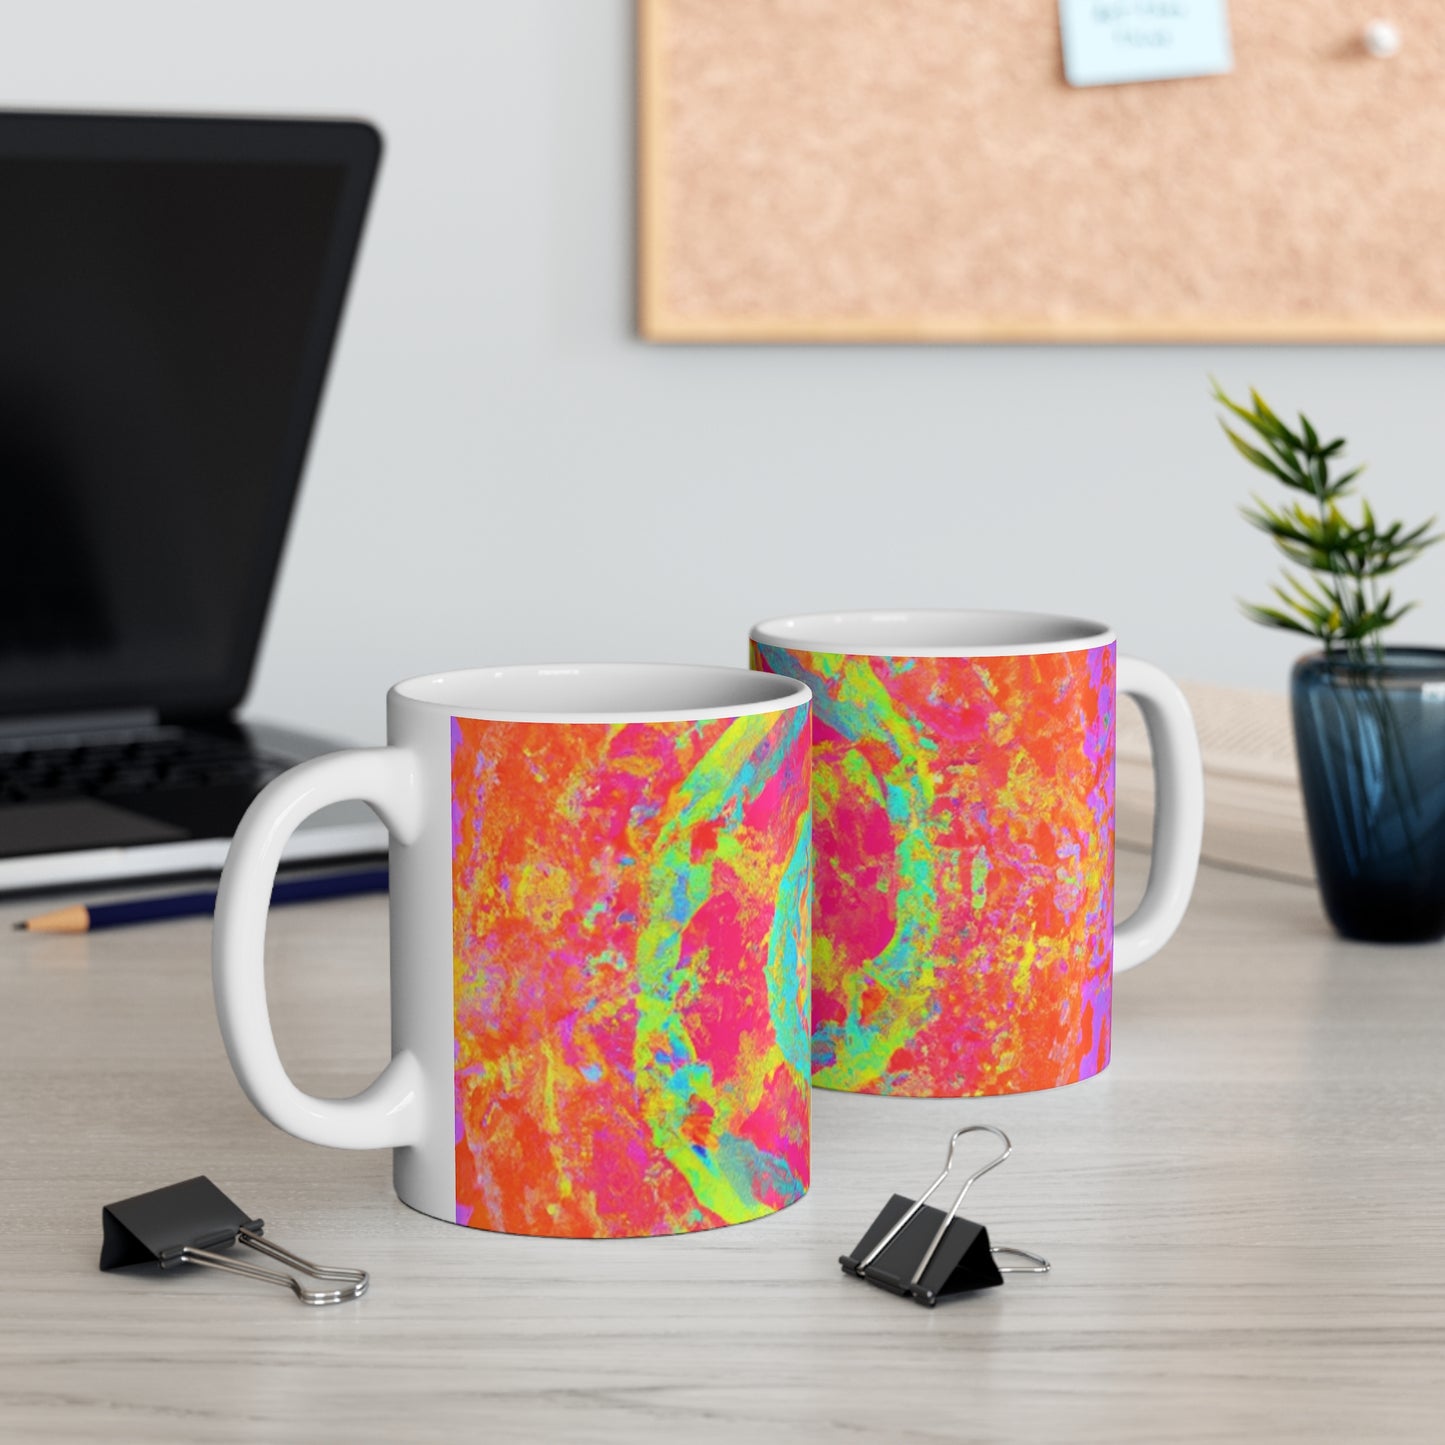 Herman's House of Java - Psychedelic Coffee Cup Mug 11 Ounce